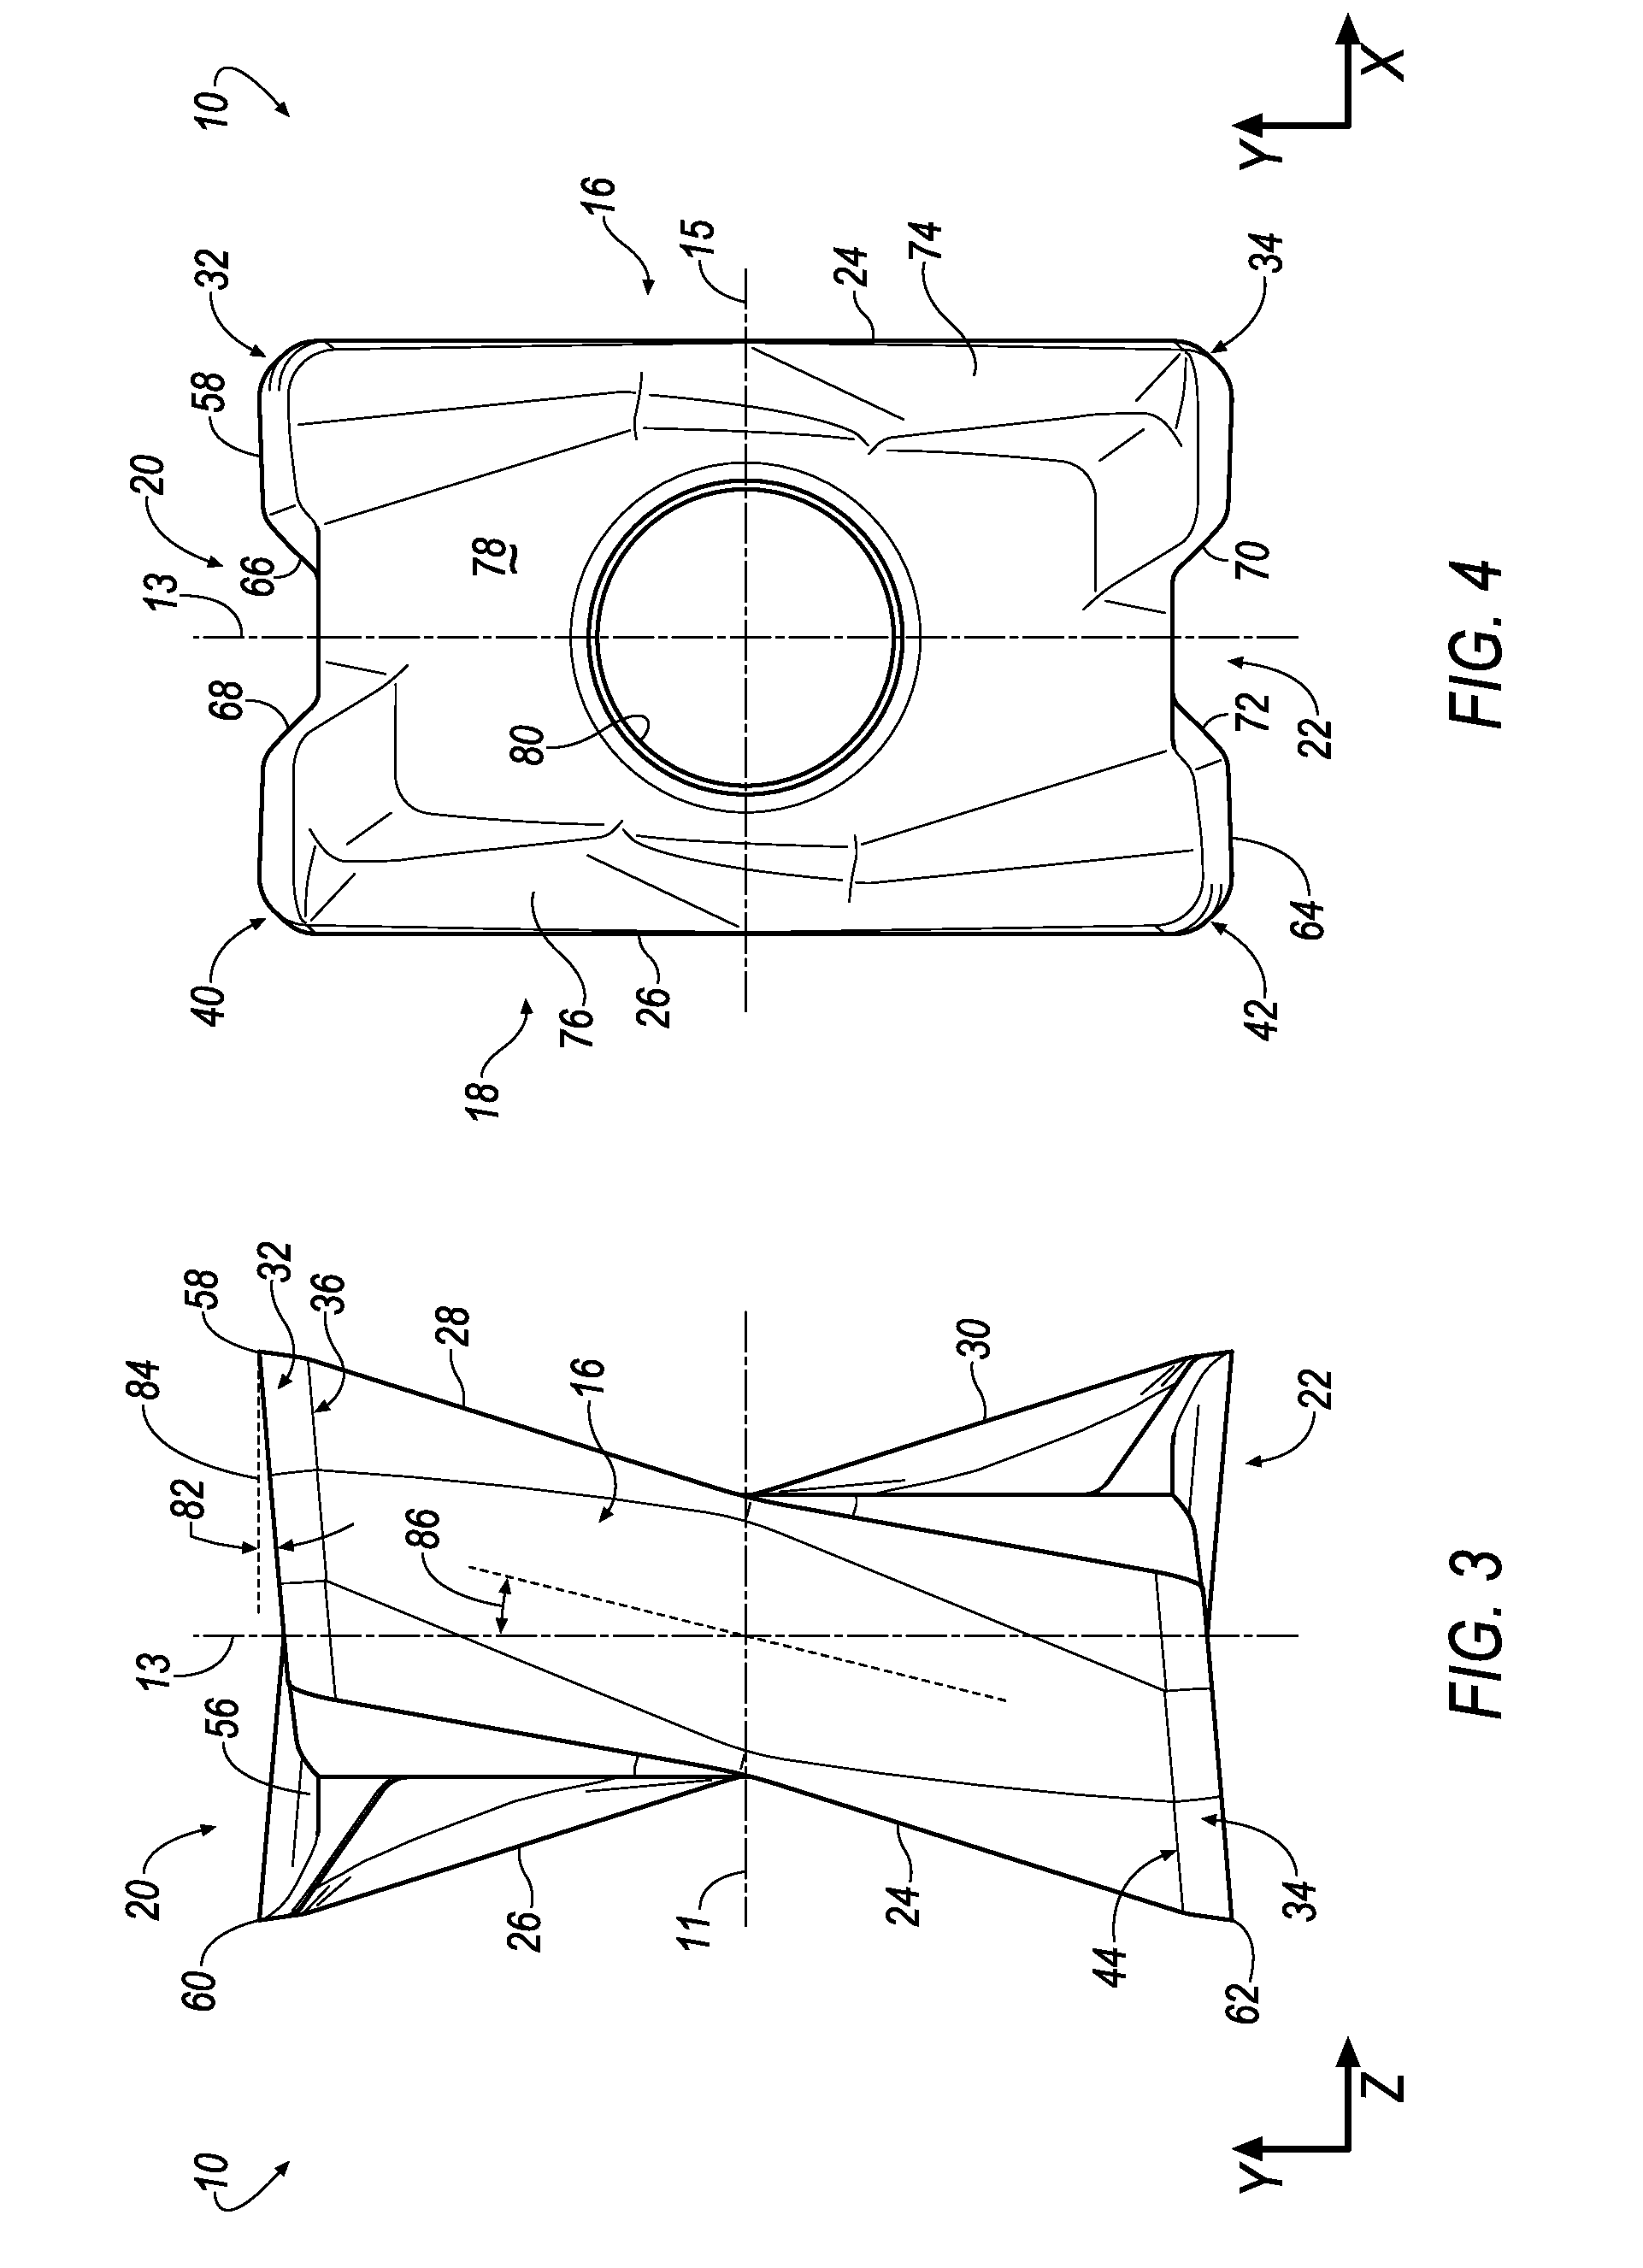 Double-sided, indexable cutting insert with ramping capability and cutting tool therefor